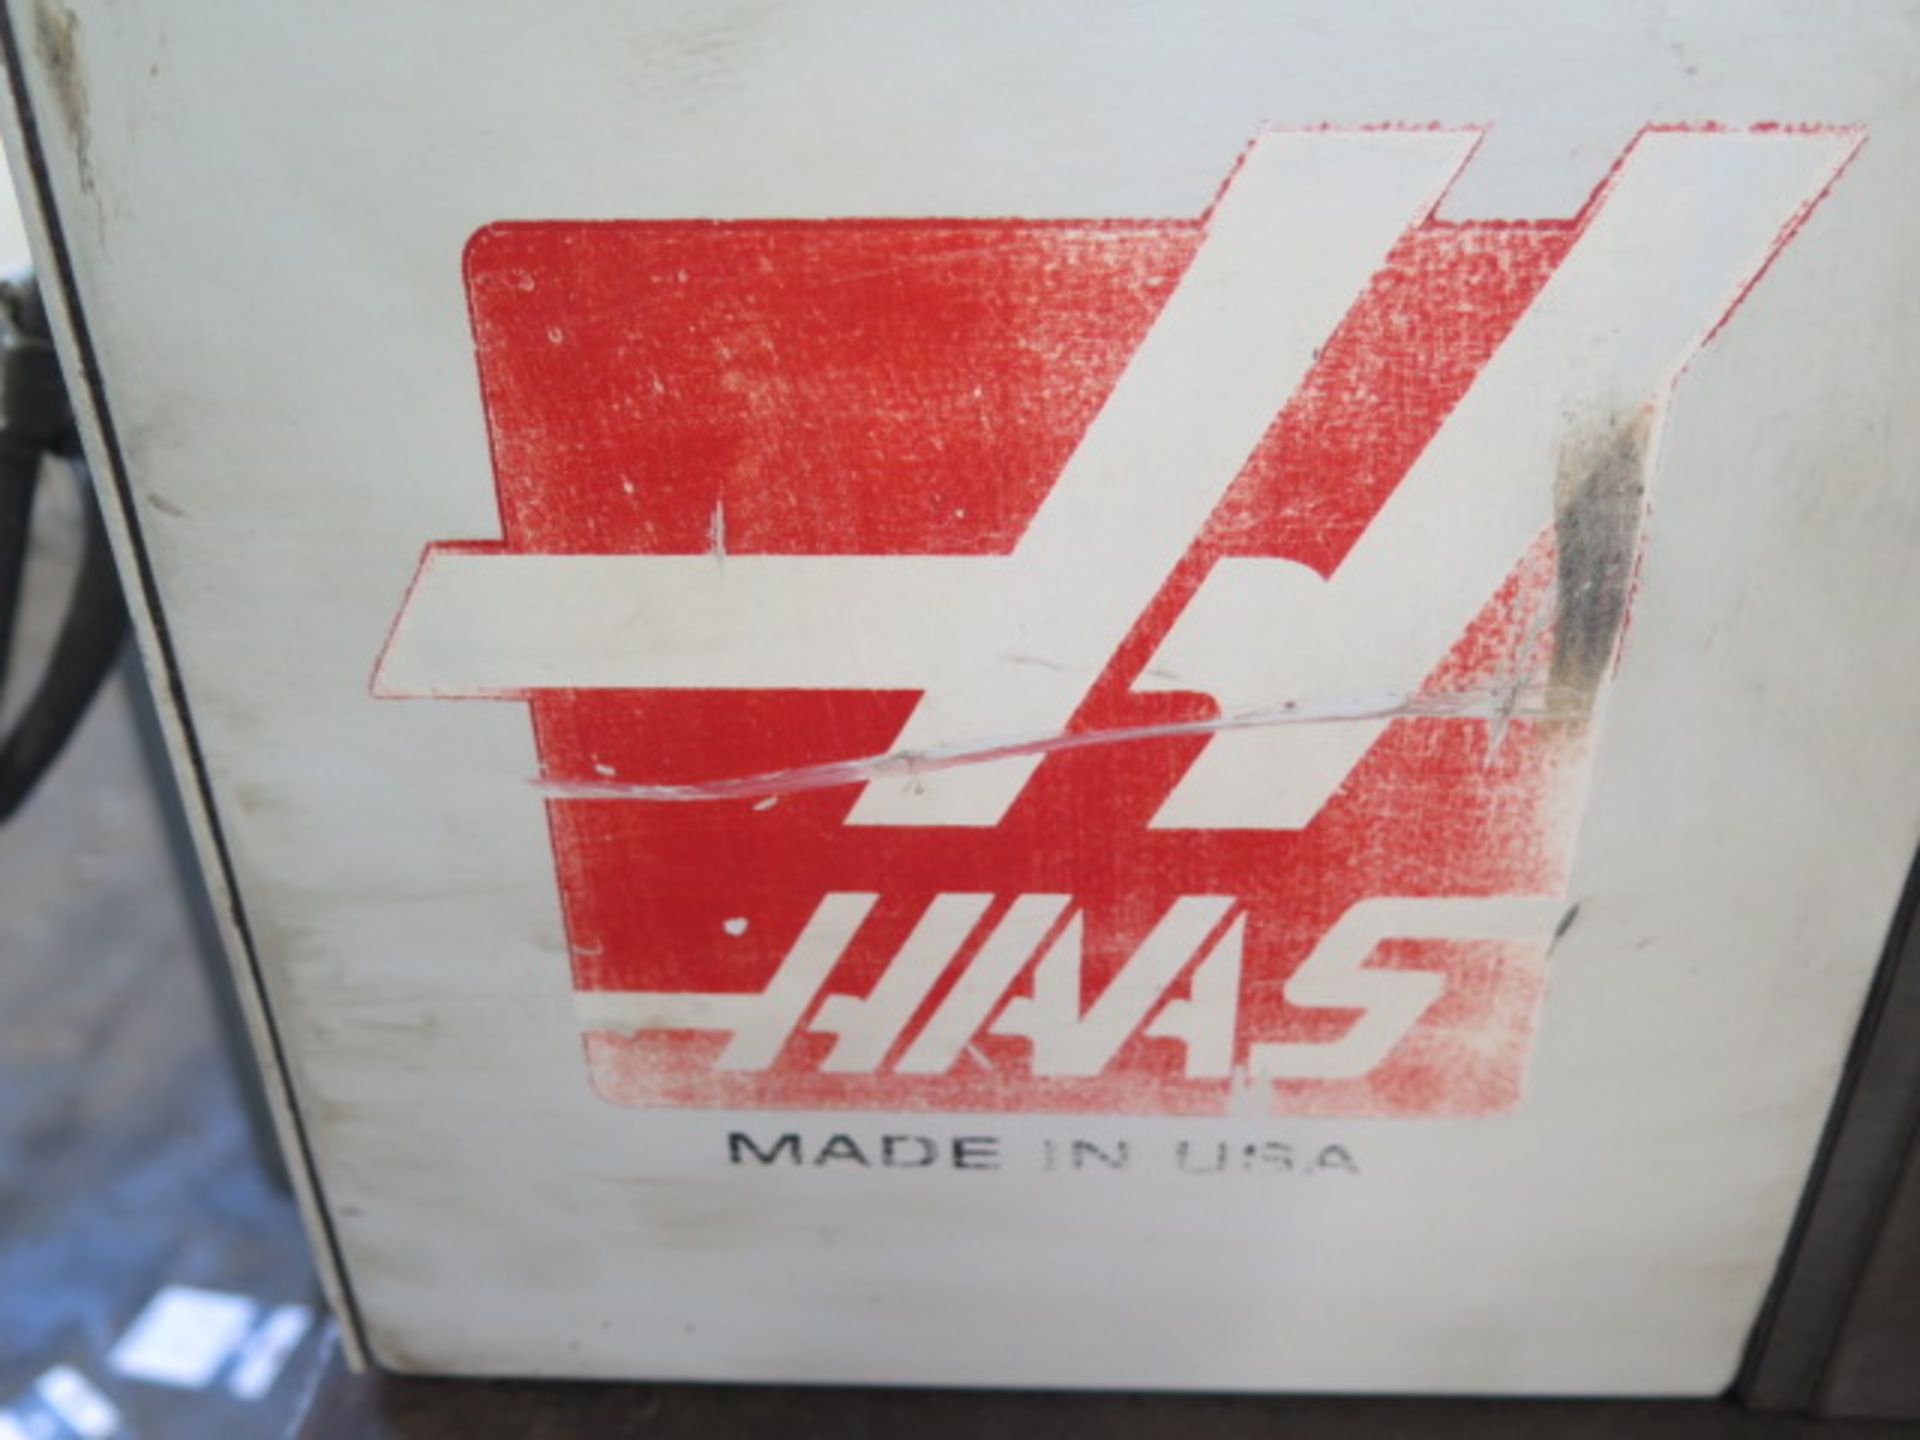 Haas HRT160H 6” 4th Axis Rotary Indexer s/n 163593 - Image 5 of 8